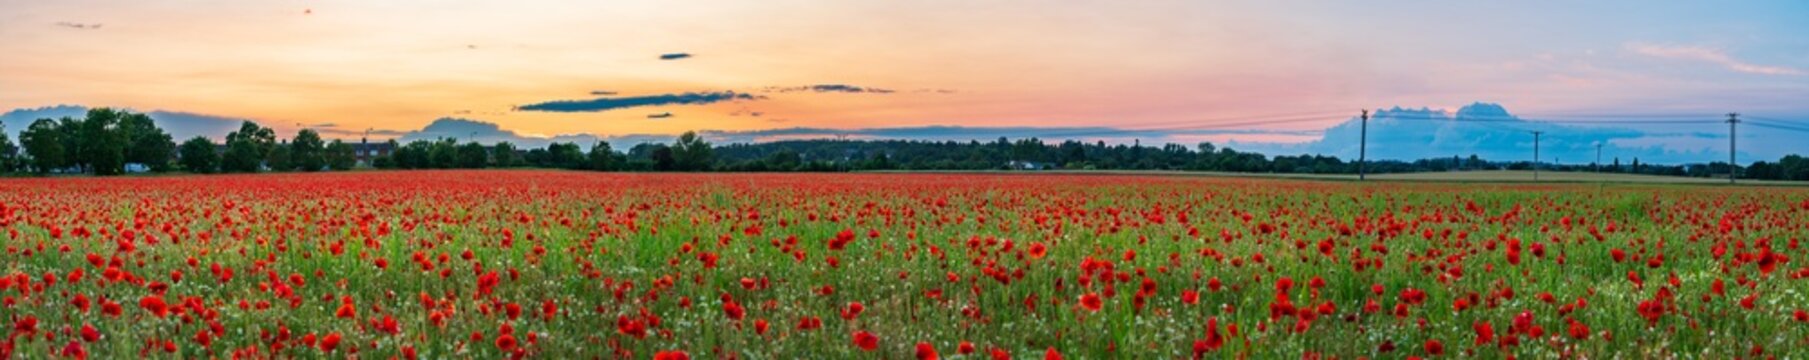 Red poppy flowers field at sunset © Pawel Pajor